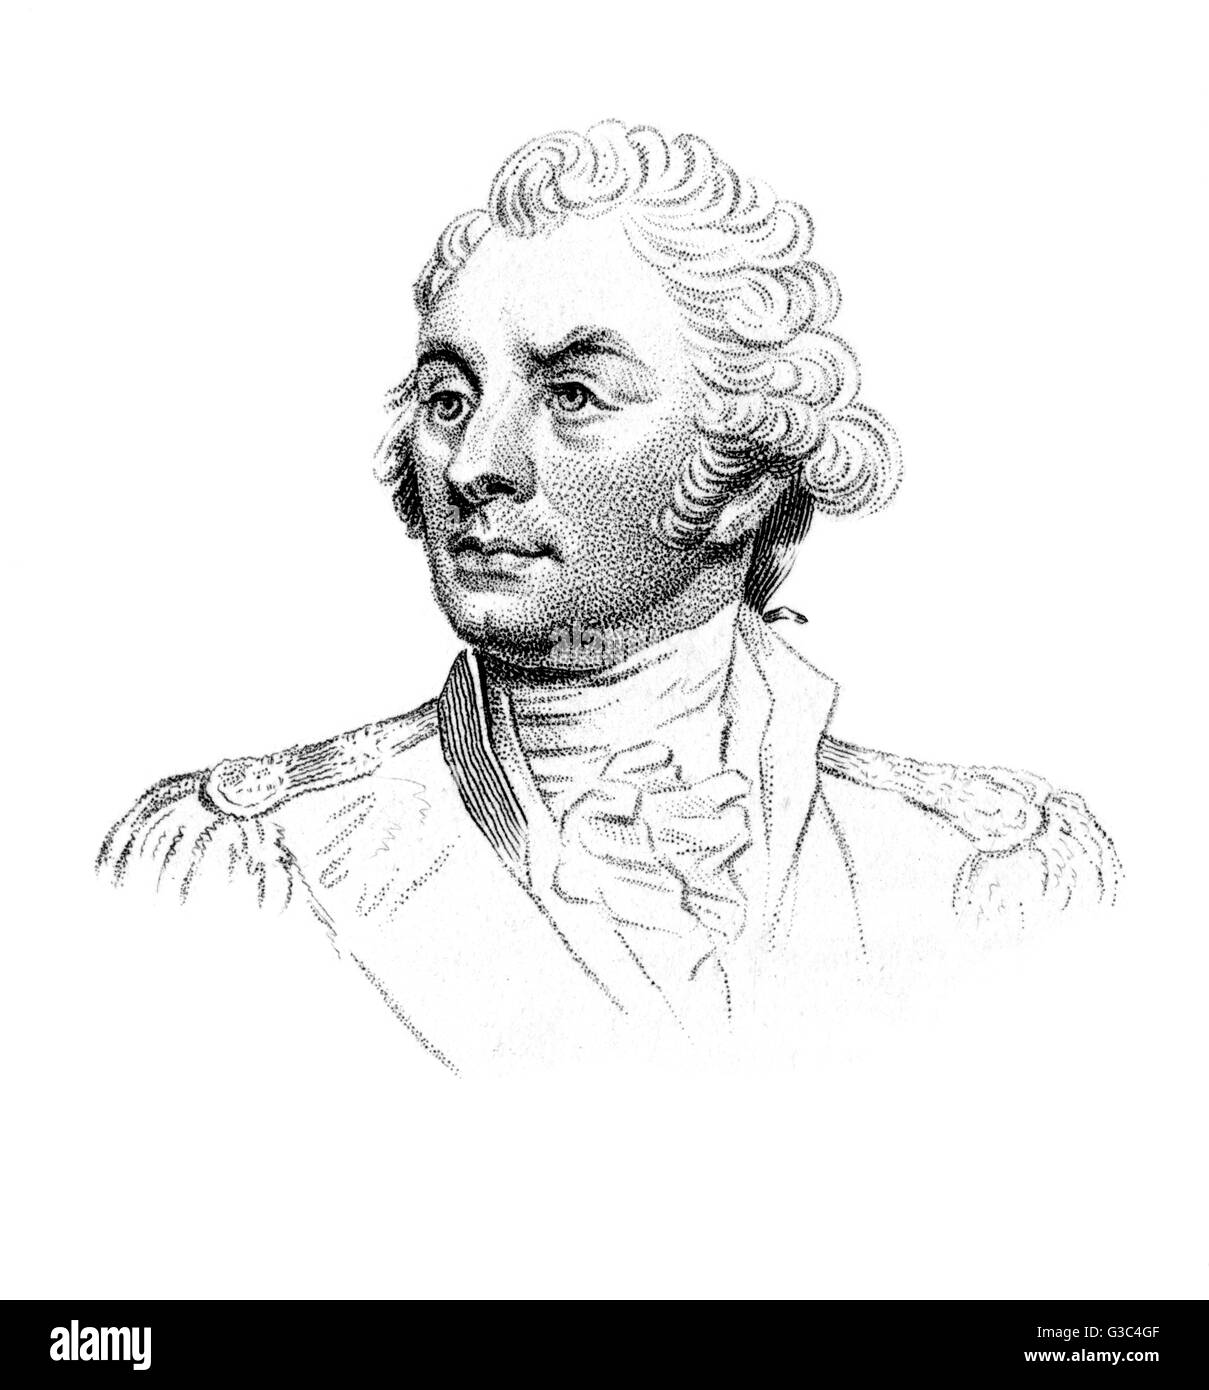 George Keith Elphinstone, 1st Viscount Keith (1746-1823), British naval admiral active throughout the Napoleonic Wars.     Date: circa 18th century Stock Photo